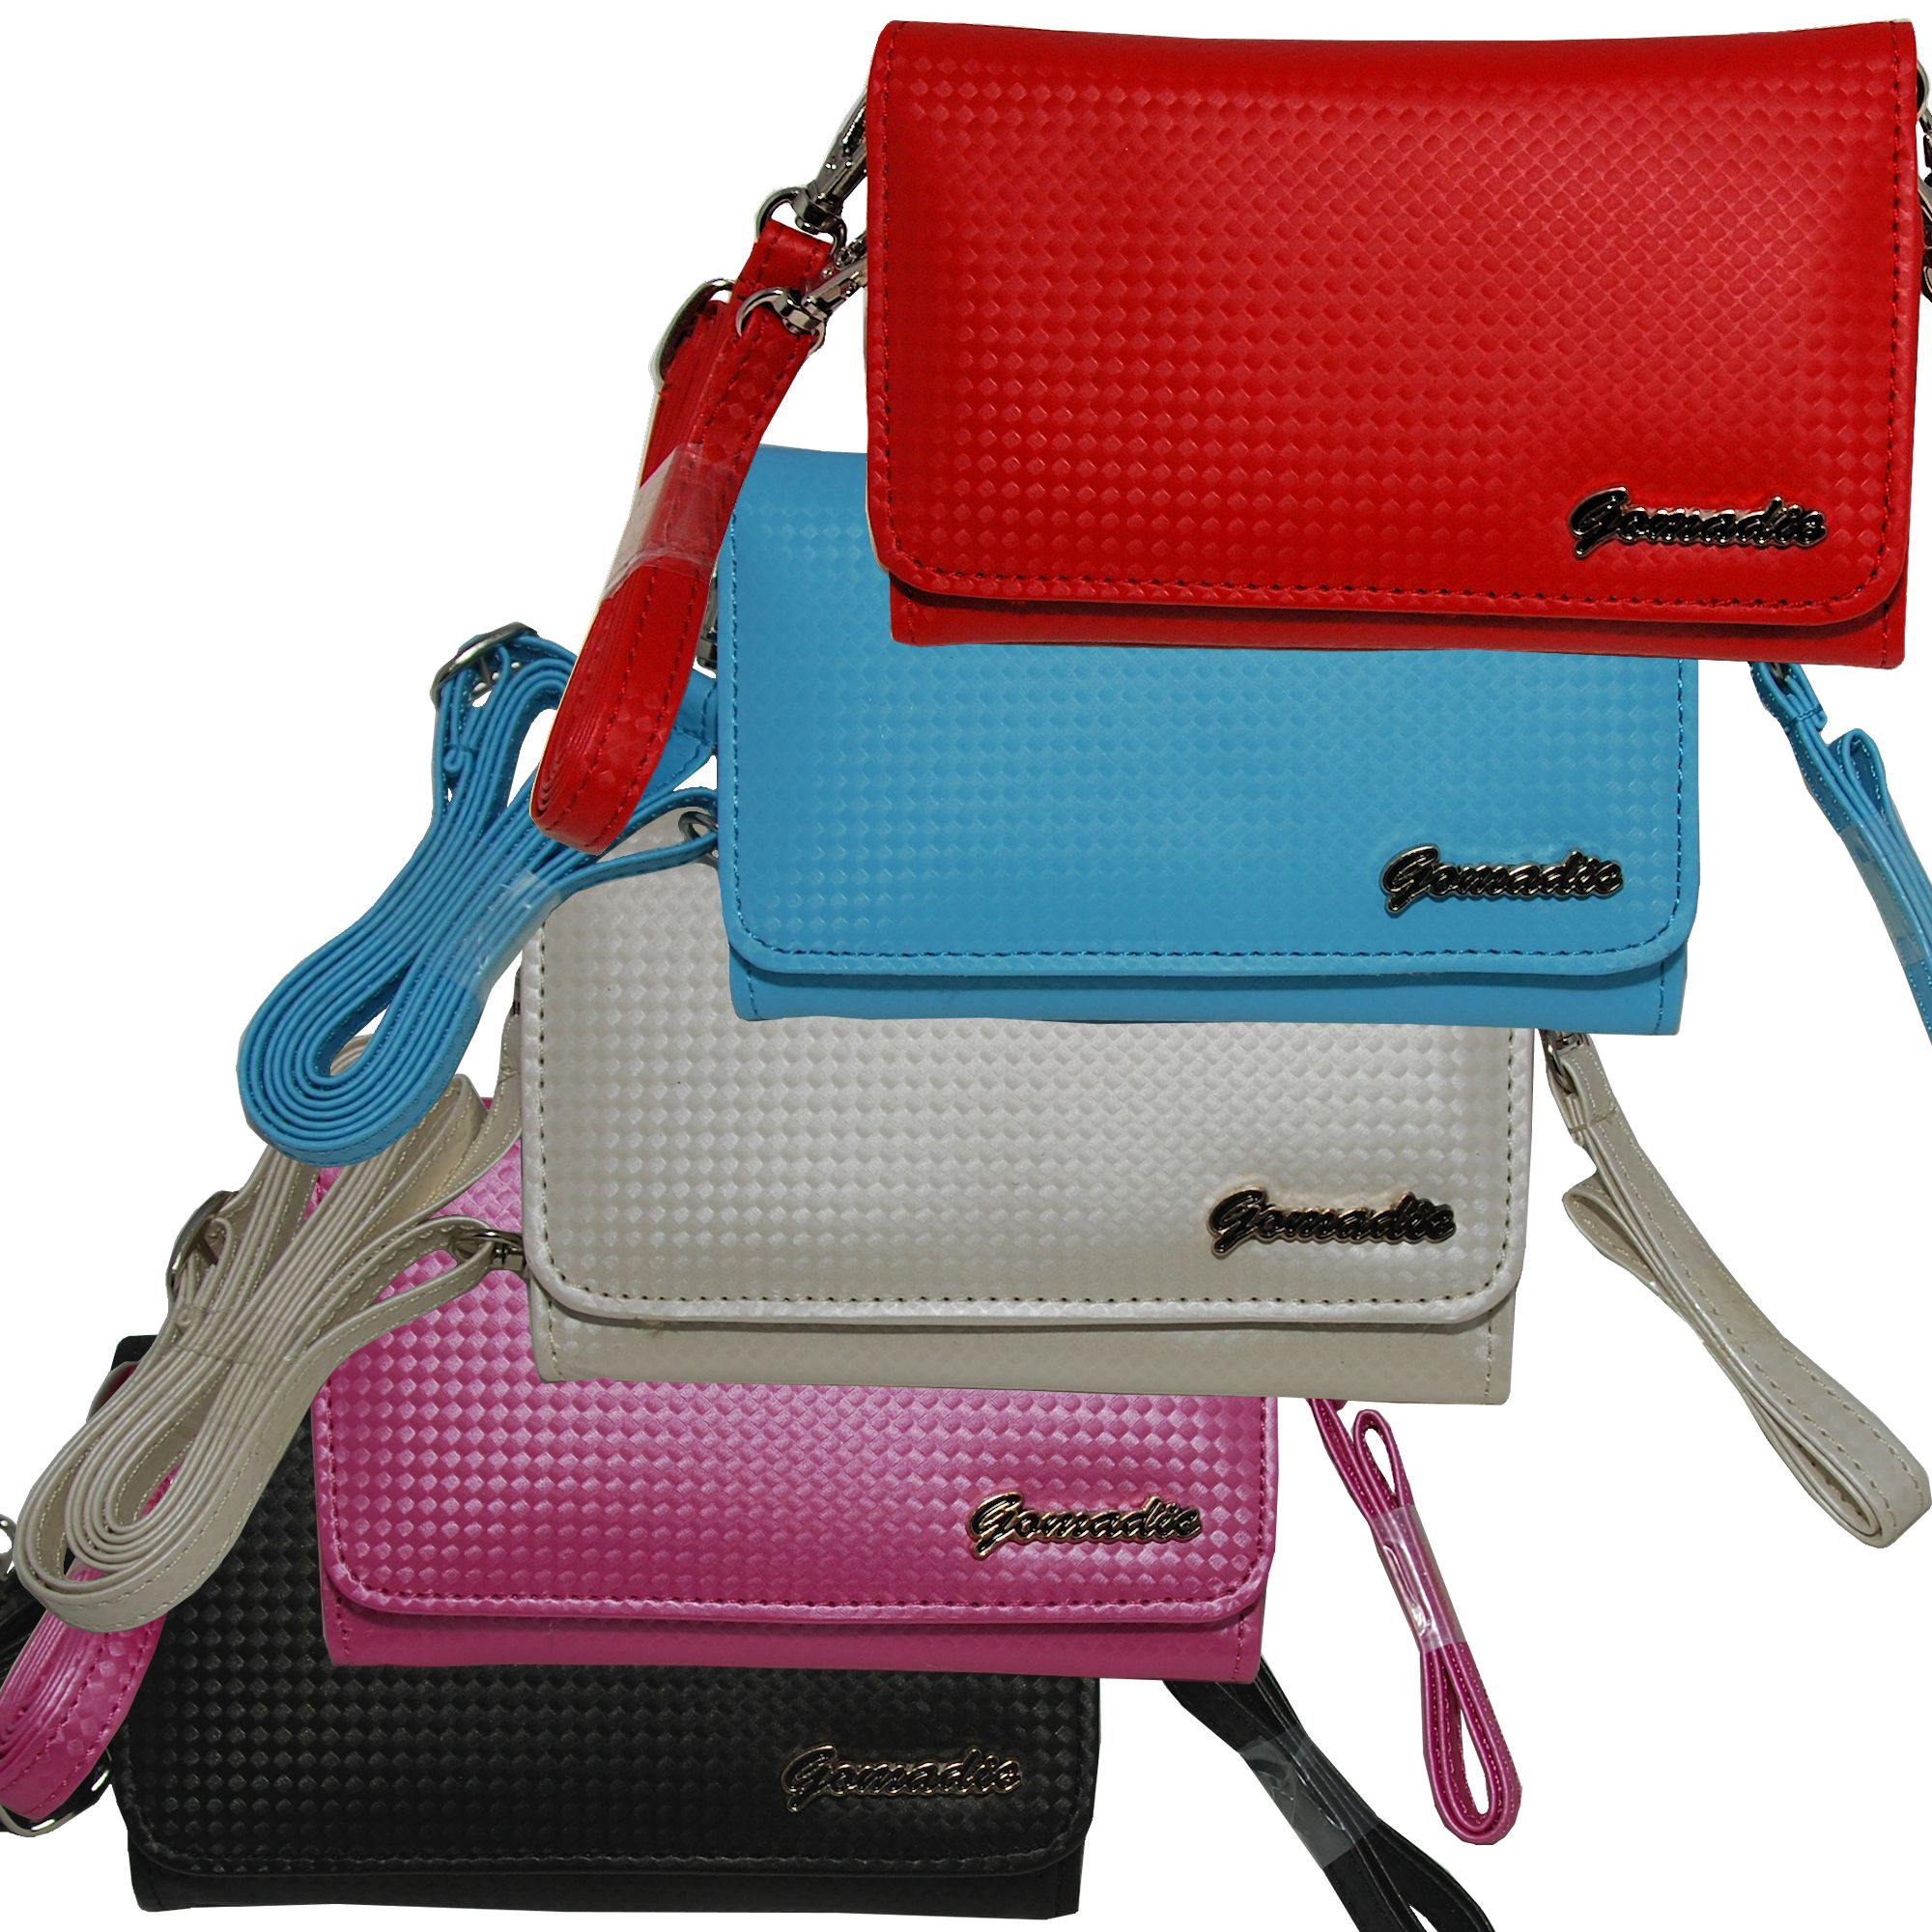 Purse Handbag Case for the Nokia 1650 1661 1680  - Color Options Blue Pink White Black and Red